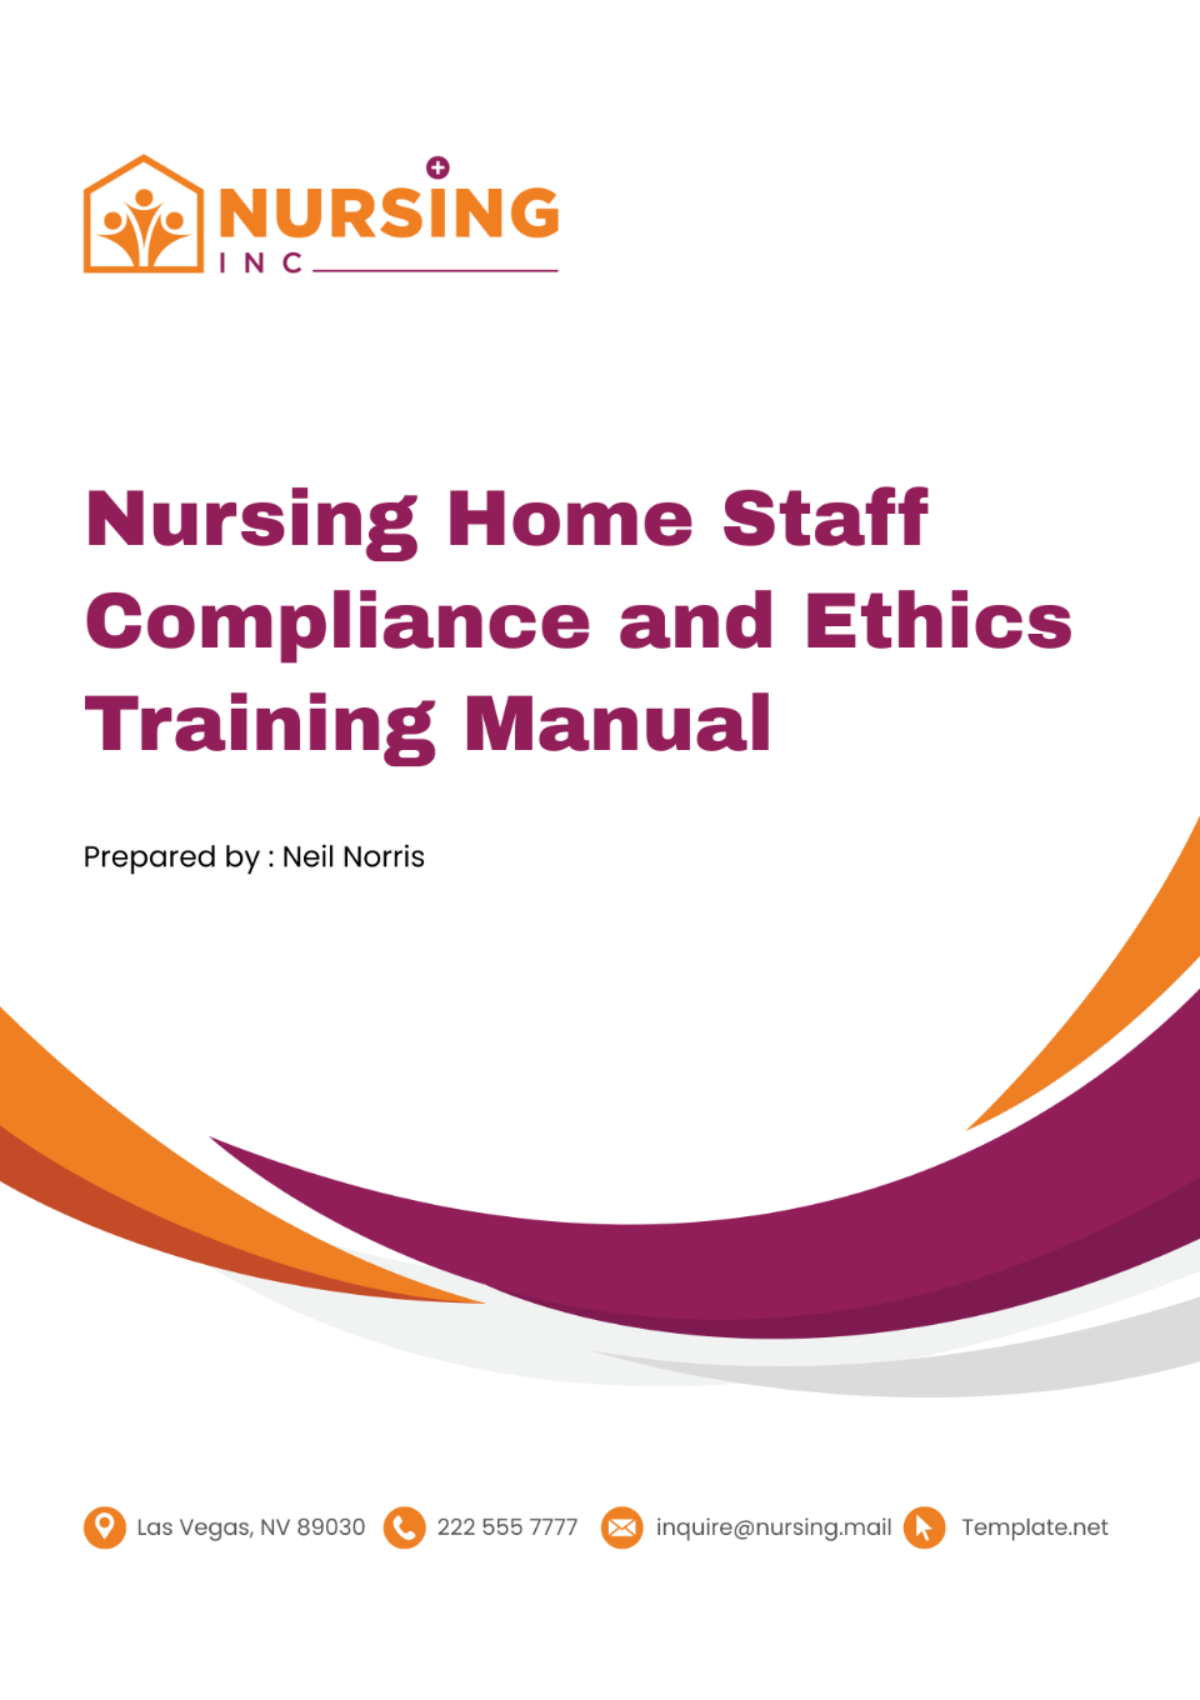 Free Nursing Home Staff Compliance and Ethics Training Manual Template